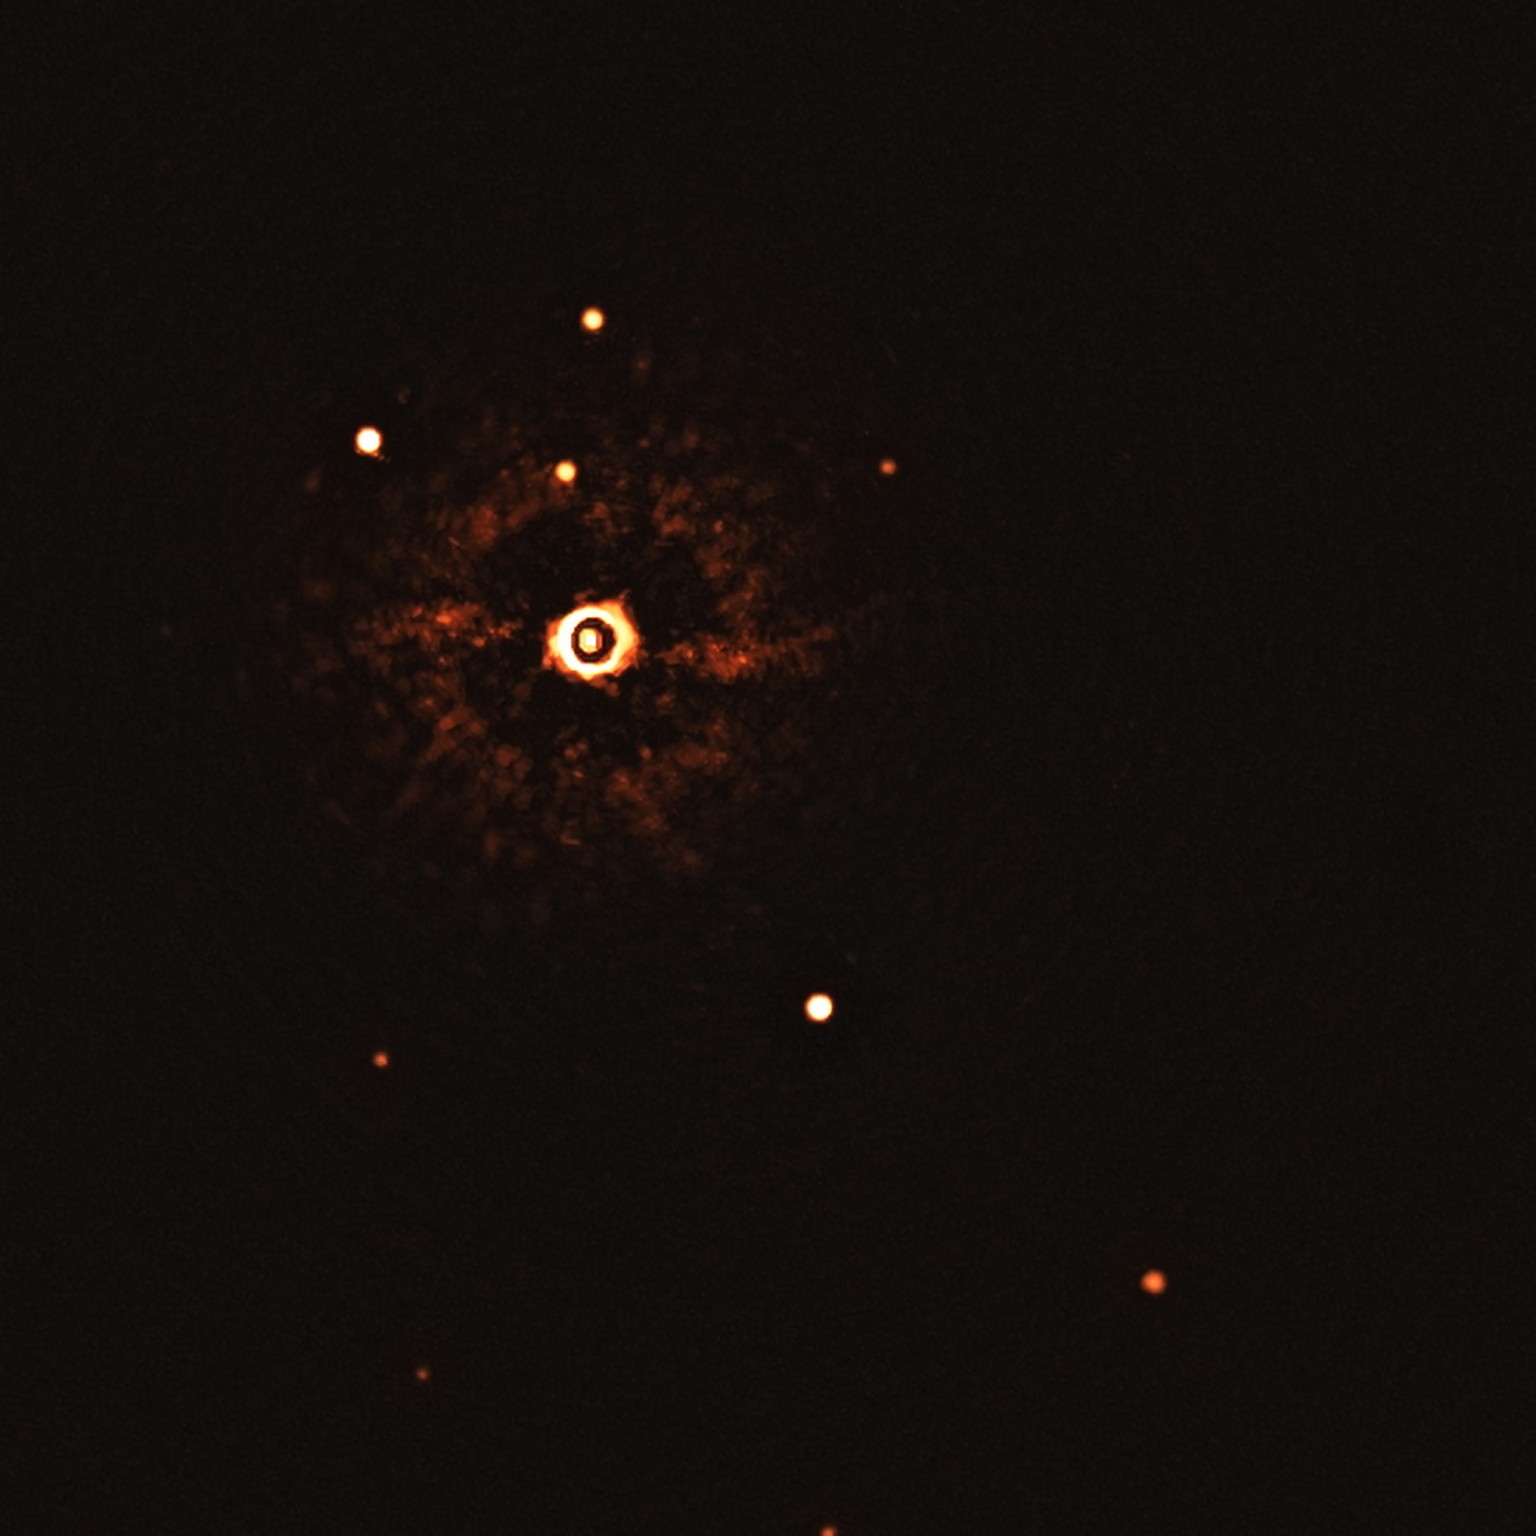 epa08560401 An undated handout photo made available by the European Southern Observatory (ESO) shows star TYC 8998-760-1 accompanied by two giant exoplanets, TYC 8998-760-1b and TYC 8998-760-1c in the ...